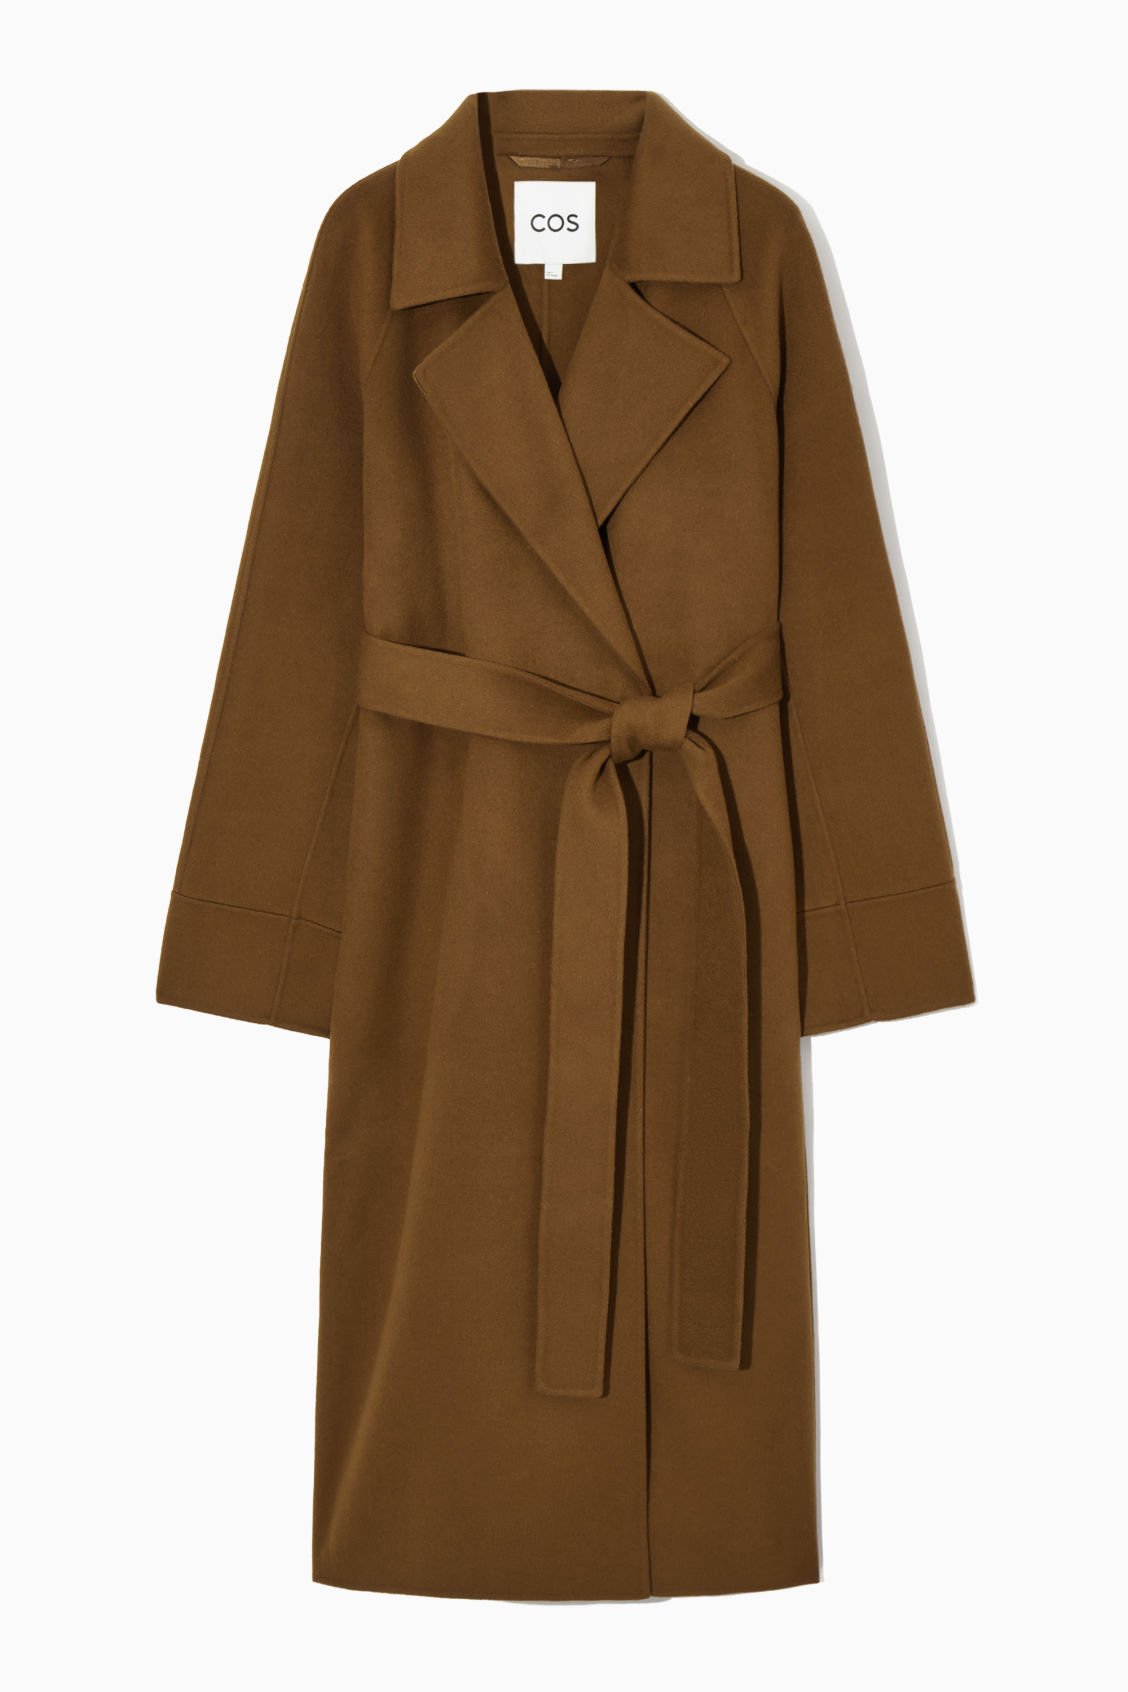 COS Belted Double-Faced Wool Coat in BROWN | Endource